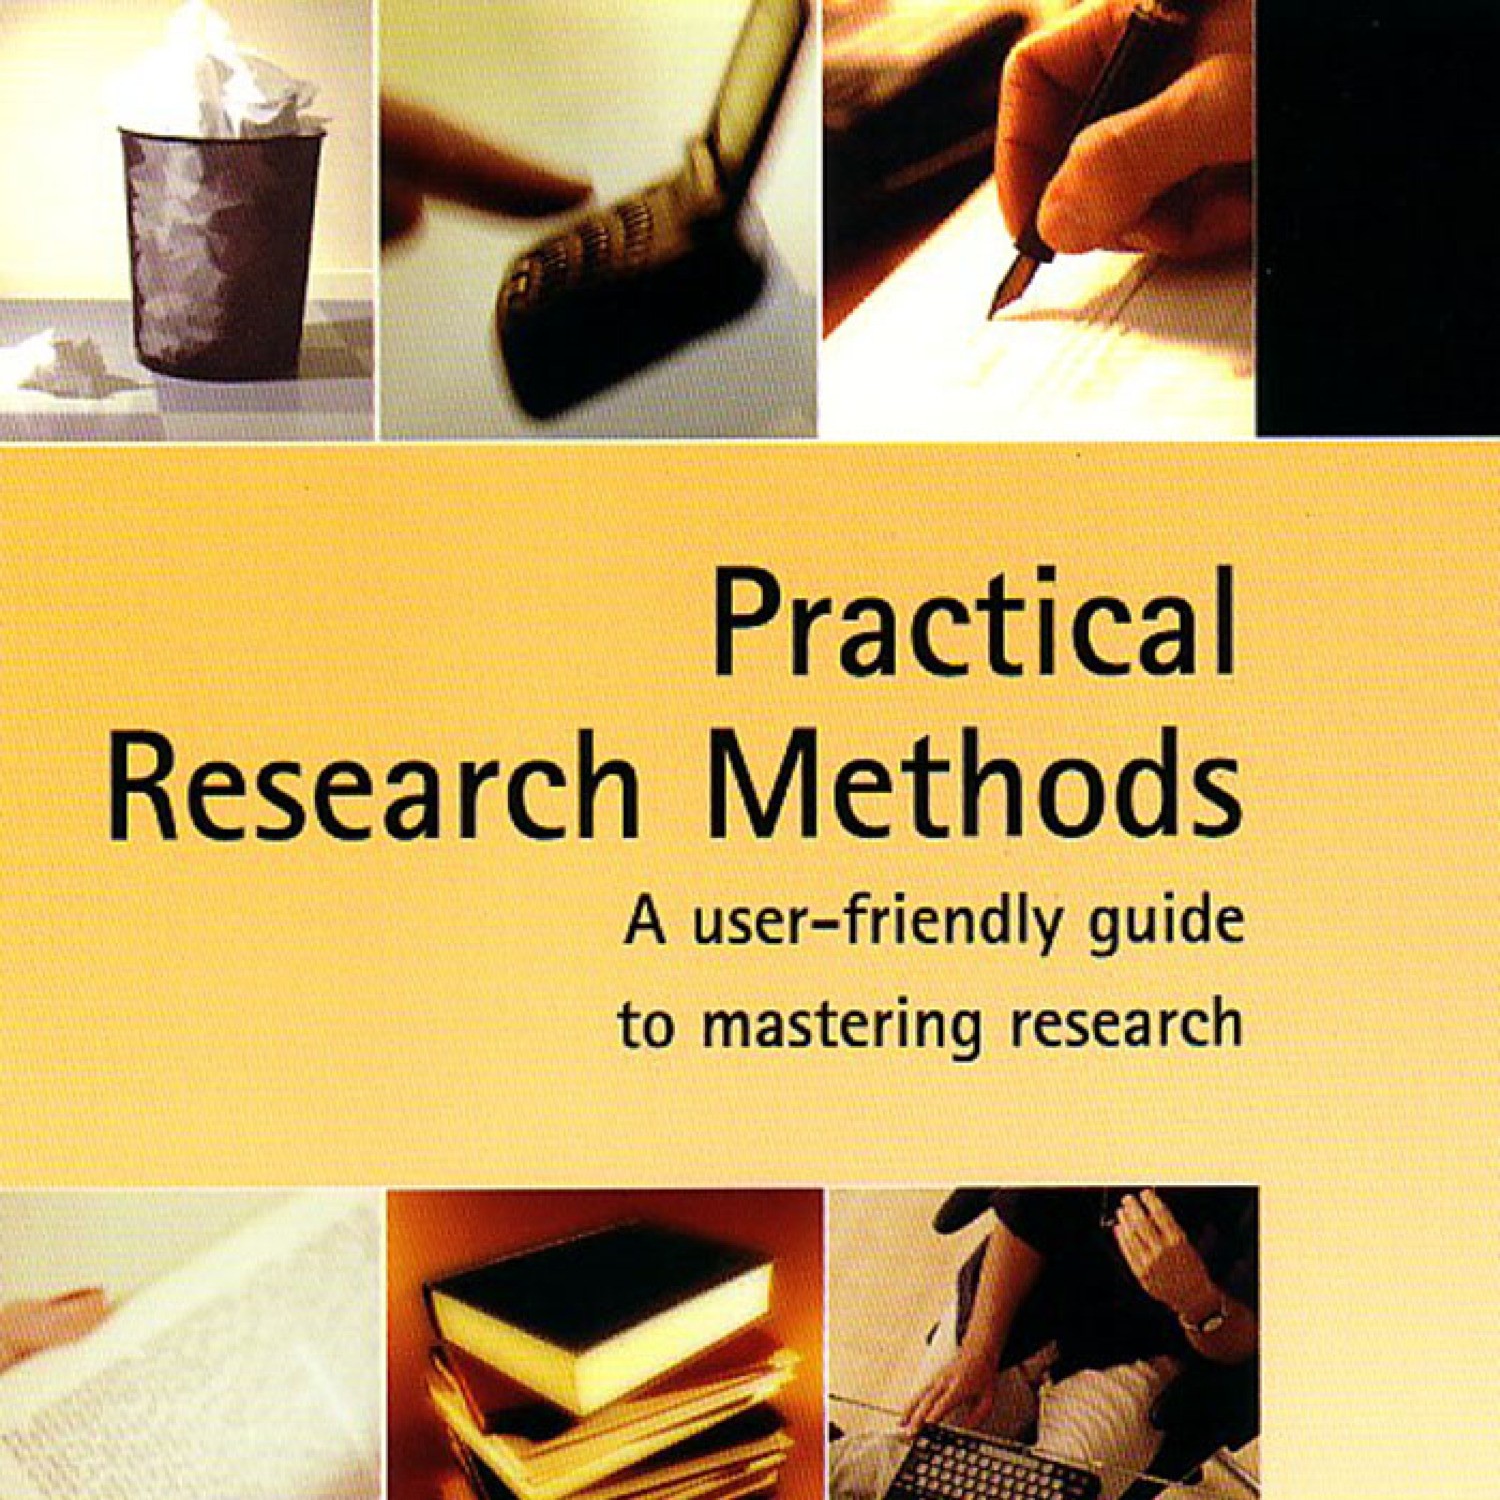 what do you think is practical research all about